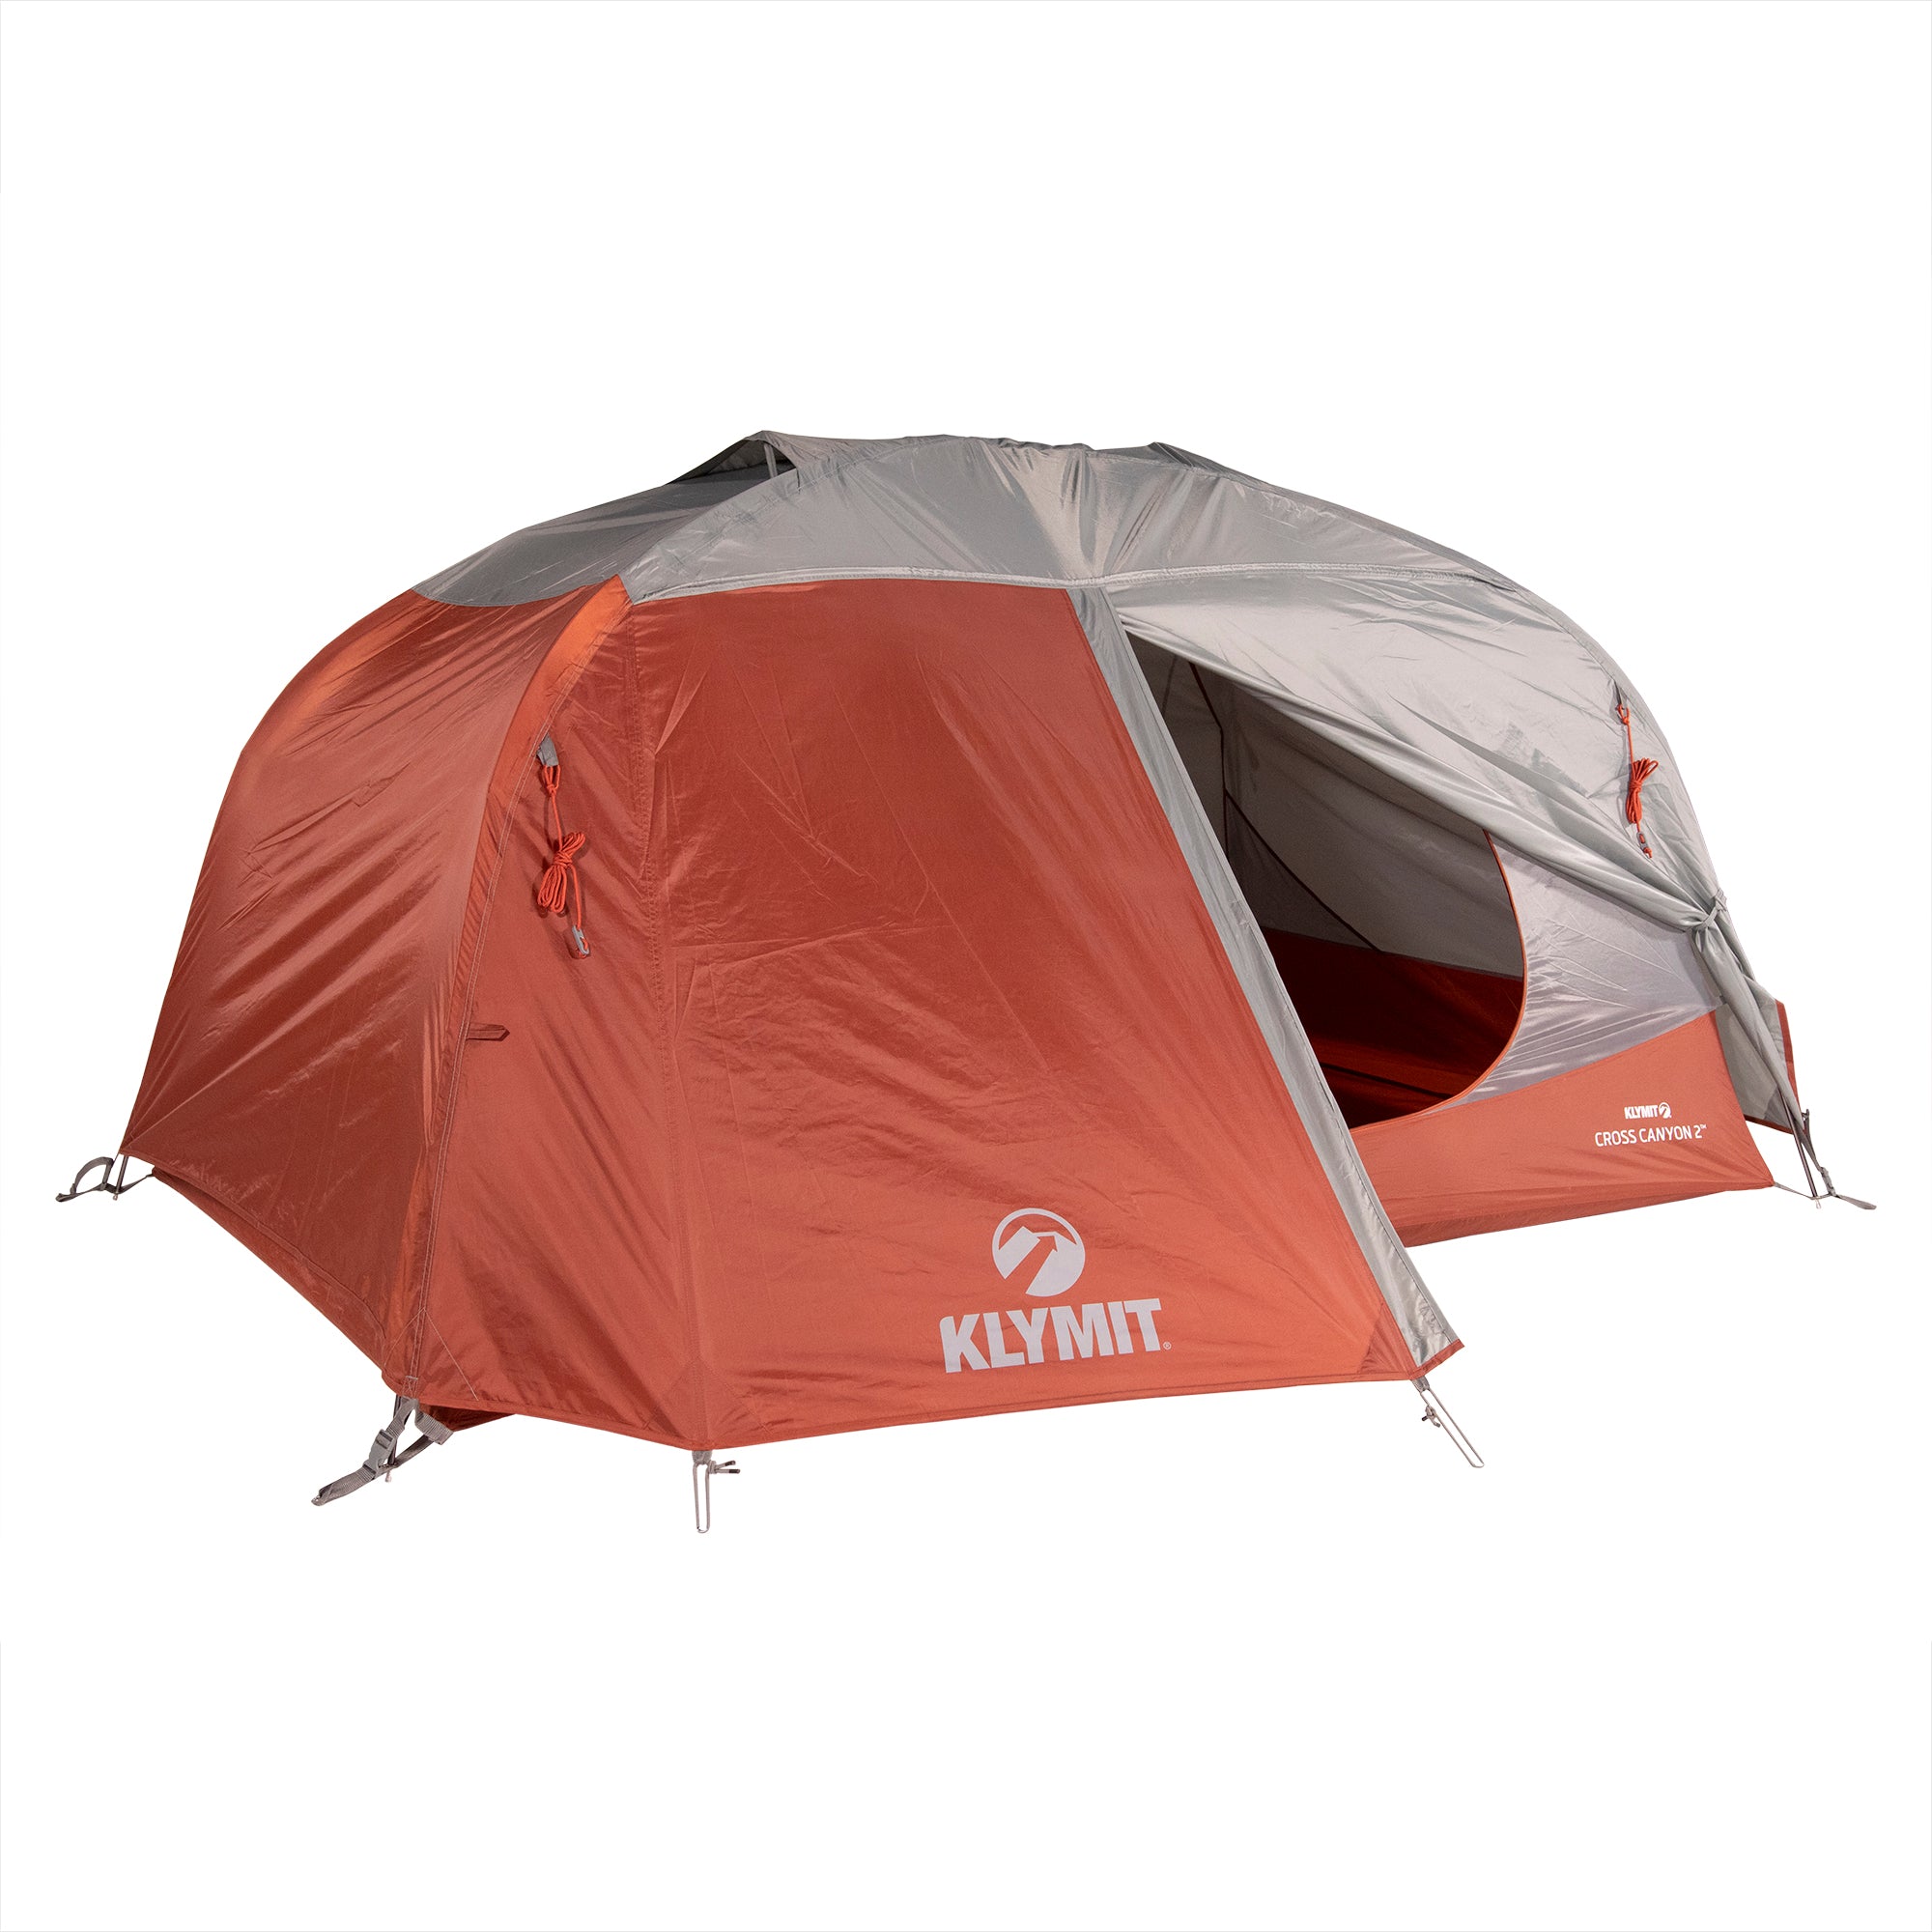 Cross Canyon Tents Shelters